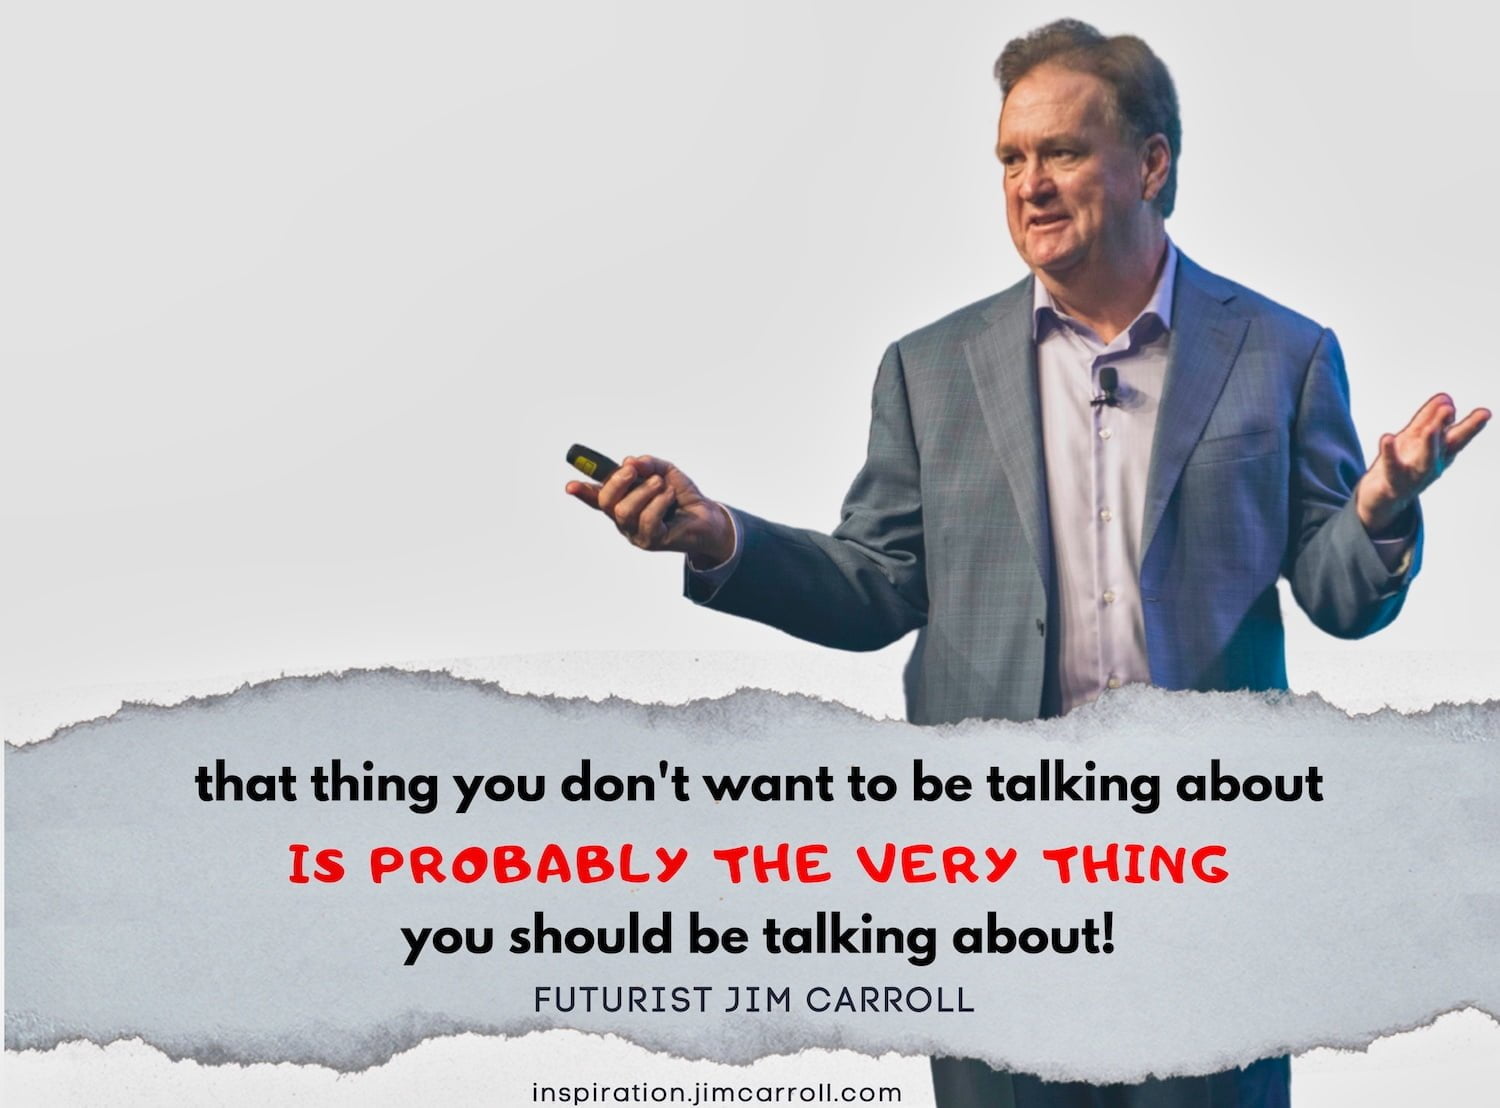 Daily Inspiration: "That thing you don't want to be talking about is probably the very thing you should be talking about!"